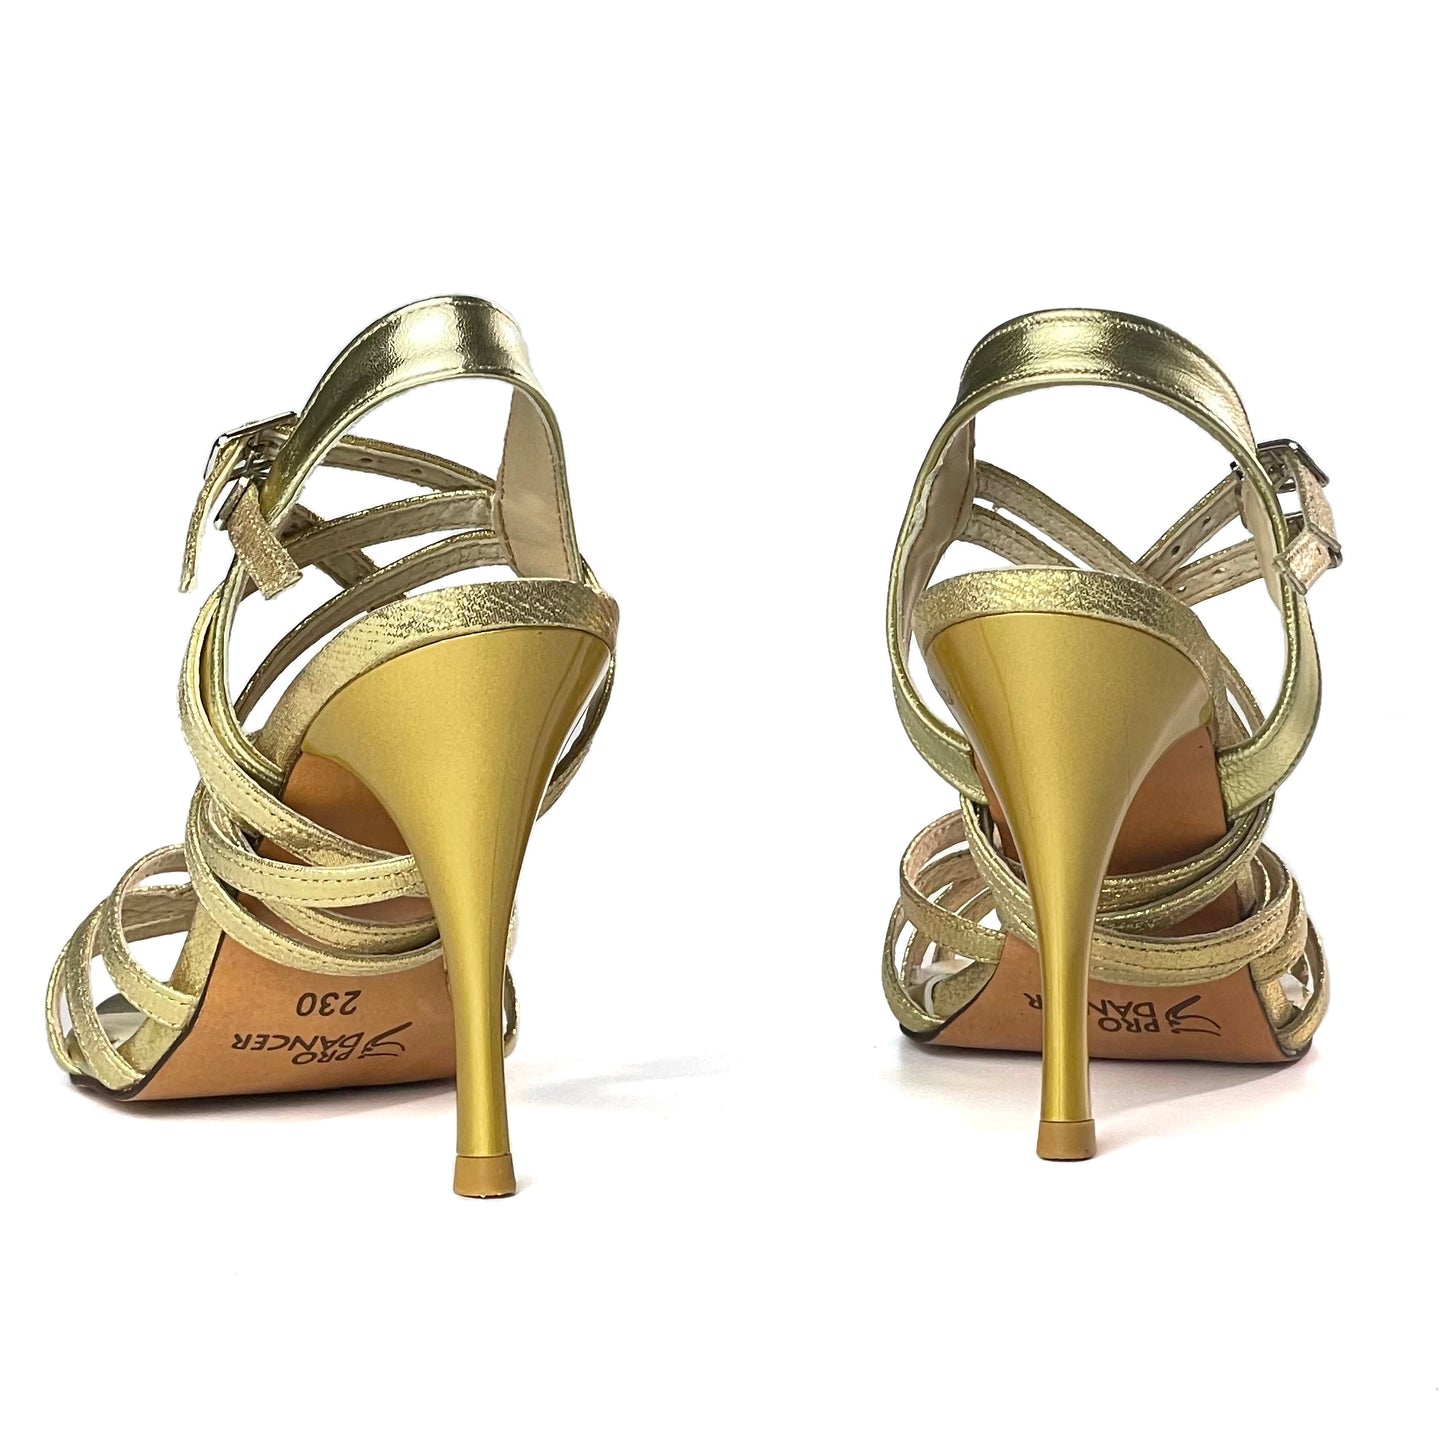 Pro Dancer Tango Argentino Shoes High Heel Dance Sandals Leather Sole Gold (PD-9065A)